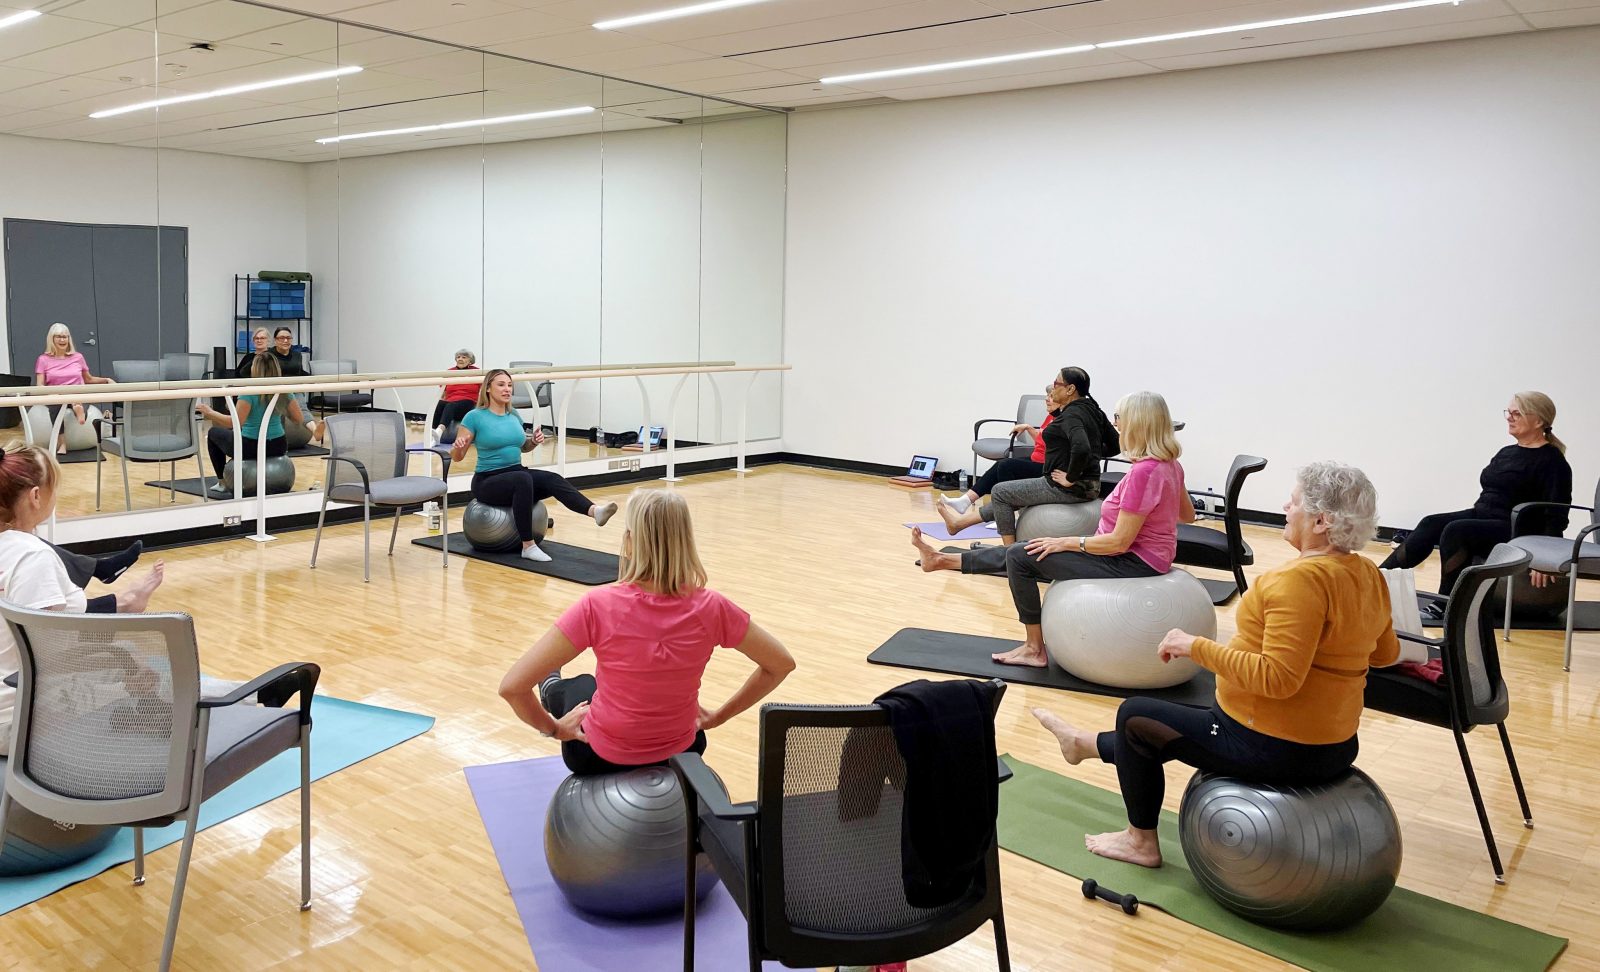 Bfit members participate in an exercise ball class led by a graduate student. Participants each sit on a yoga ball while watching the instructor.